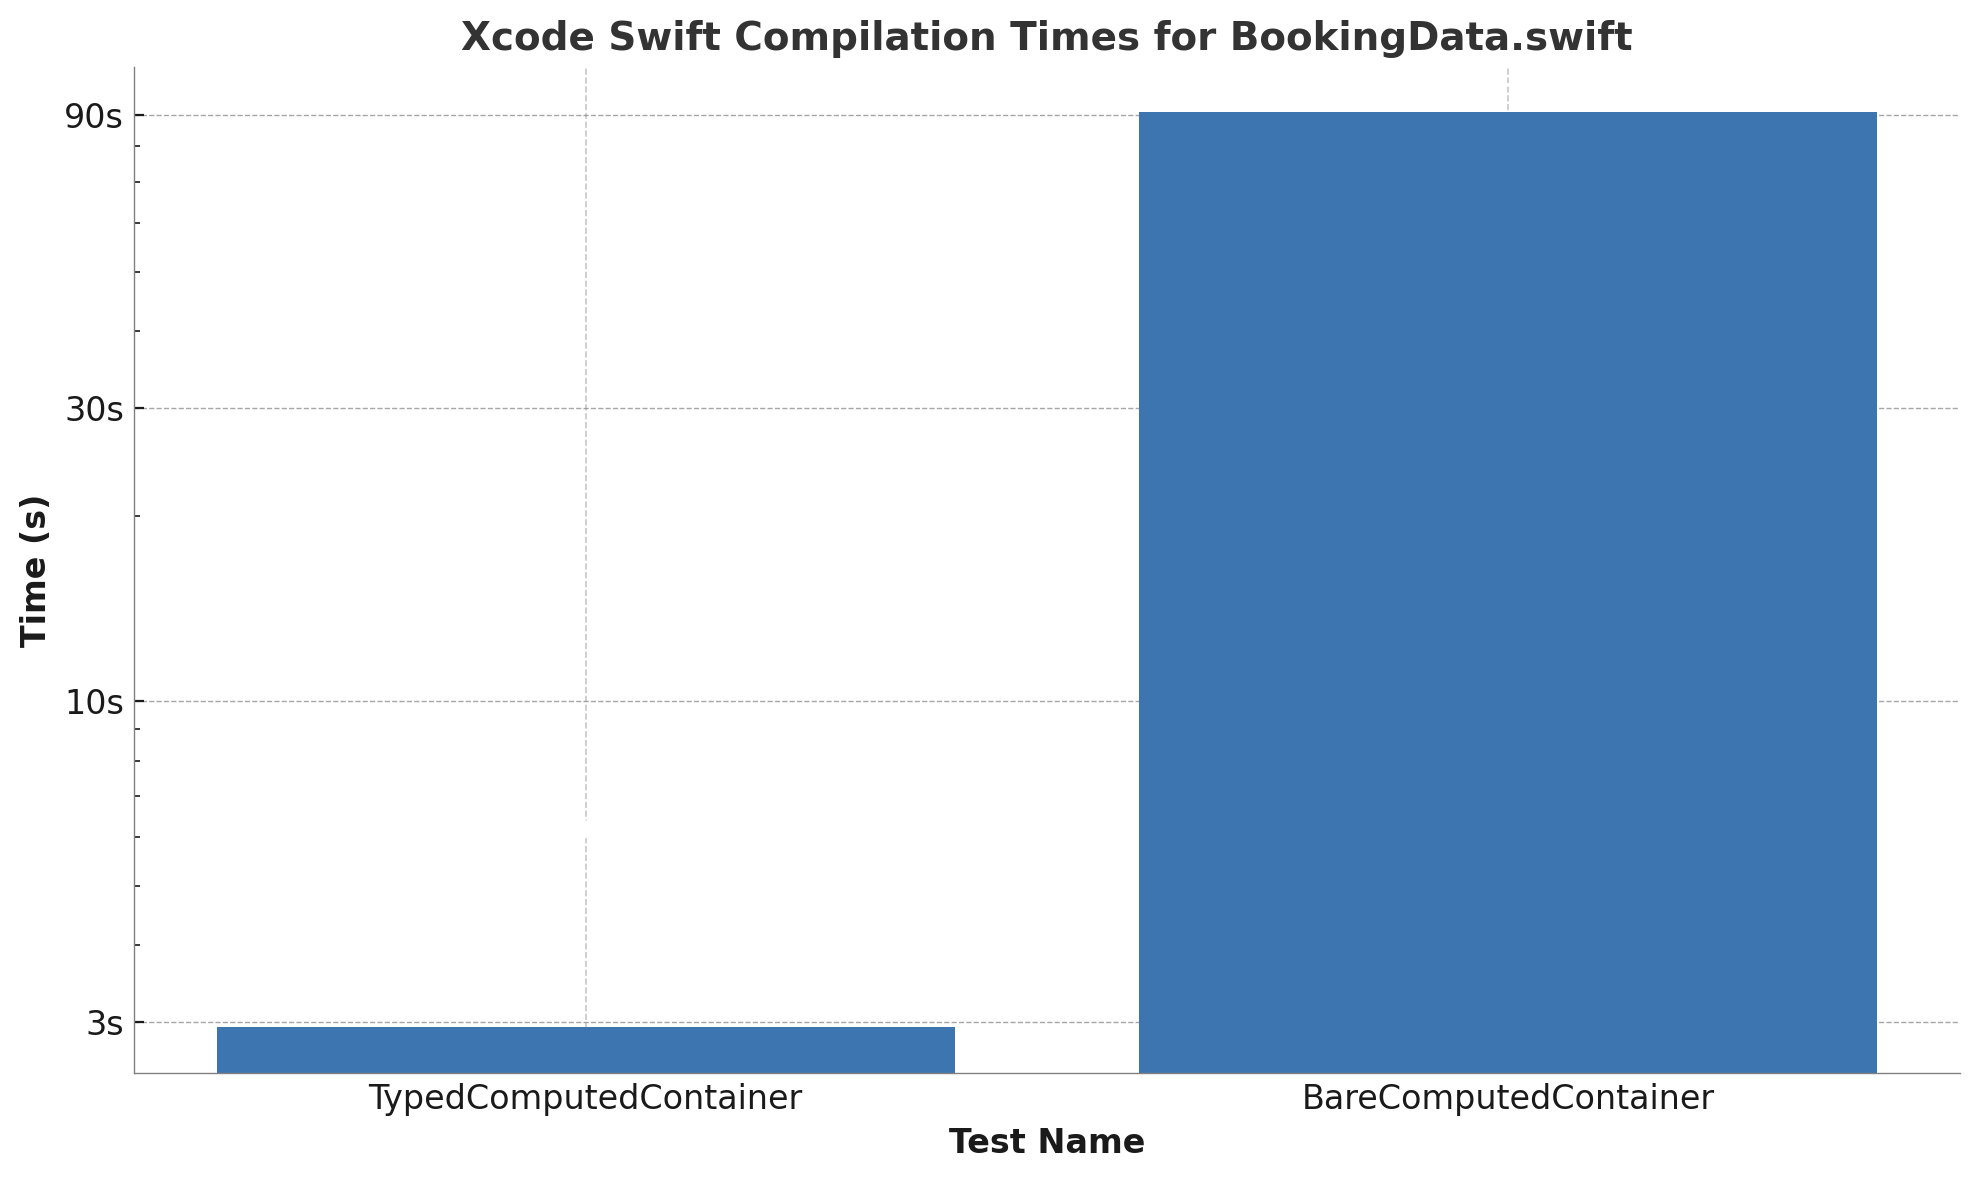 Using bare init is 30x slower than using a typed init